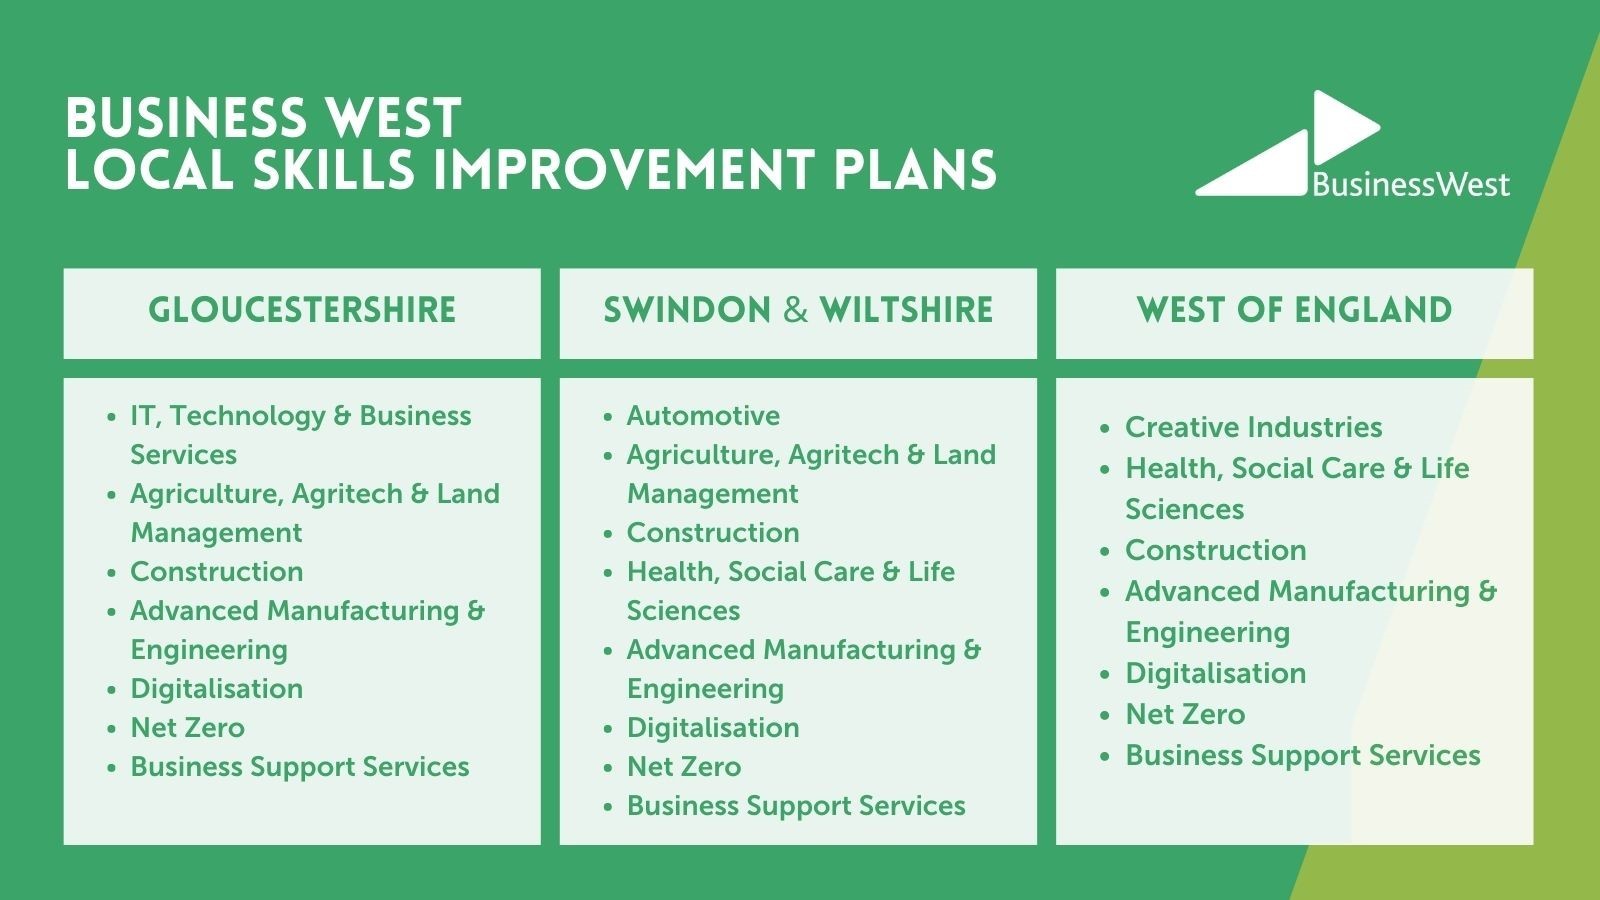 Image shows the sectors each of the Local Skills Improvement Plans are covering for Business West.